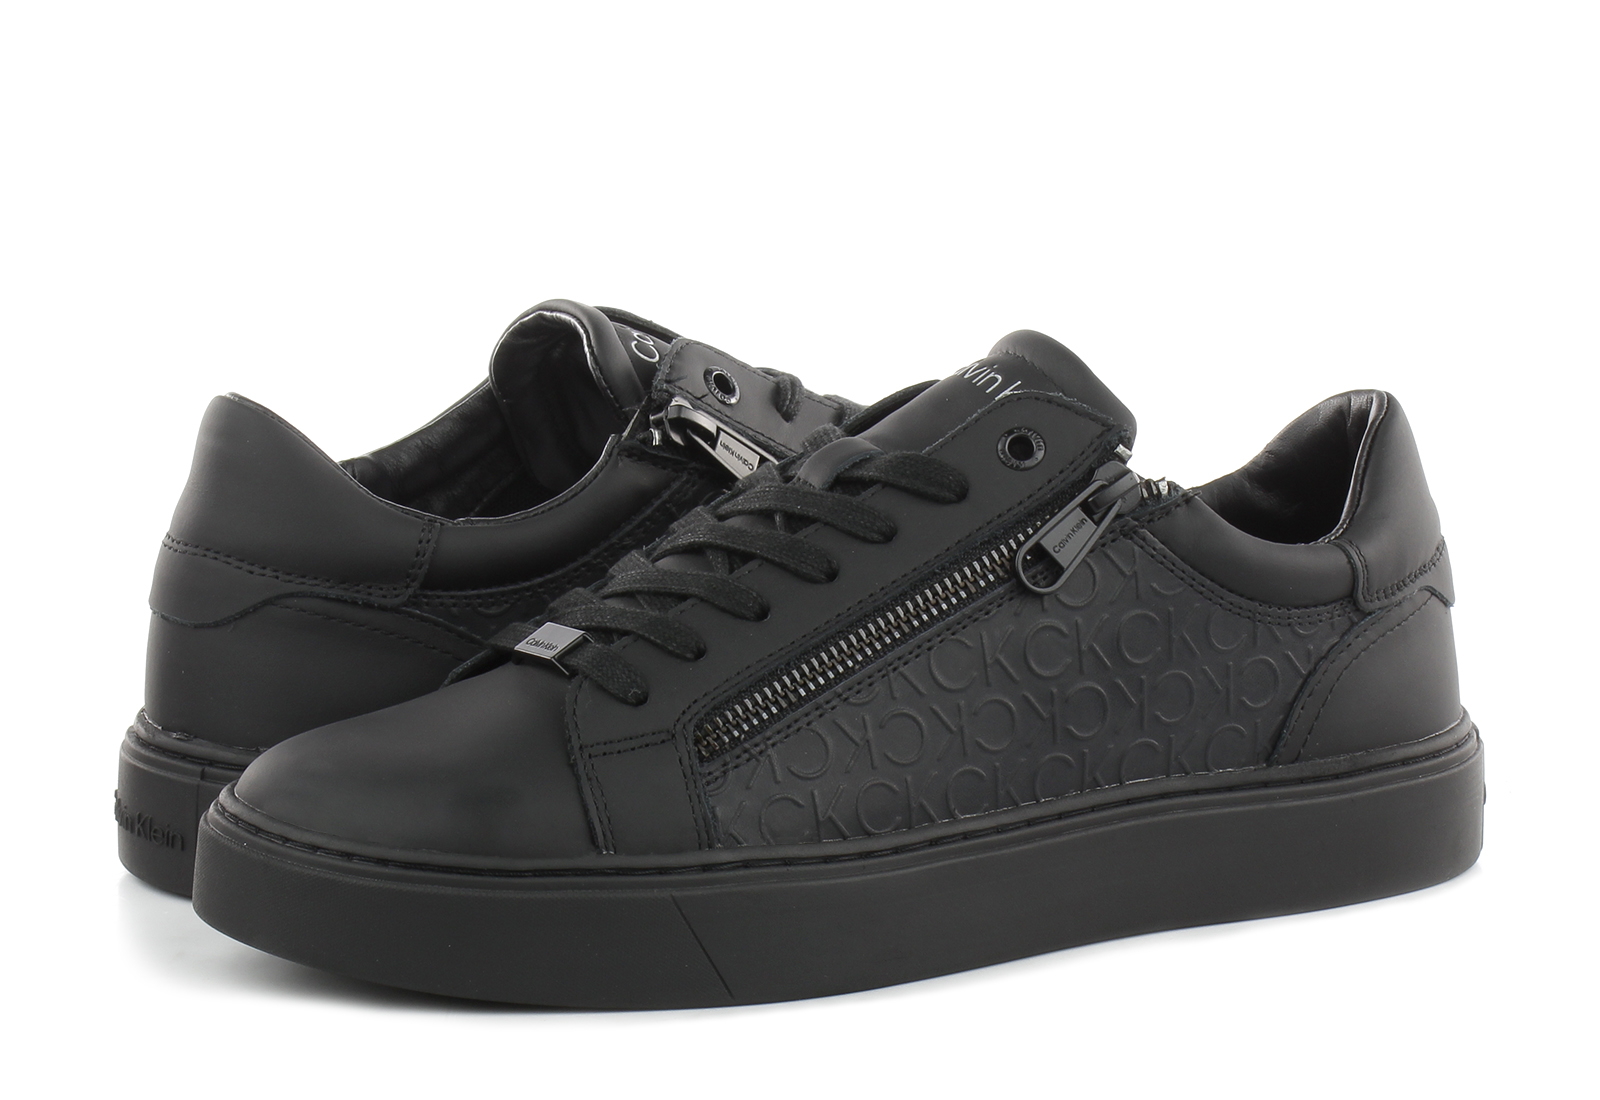 Calvin Klein Trainers - Cole M 3l4 - HM00813-0GK - Online shop for sneakers,  shoes and boots